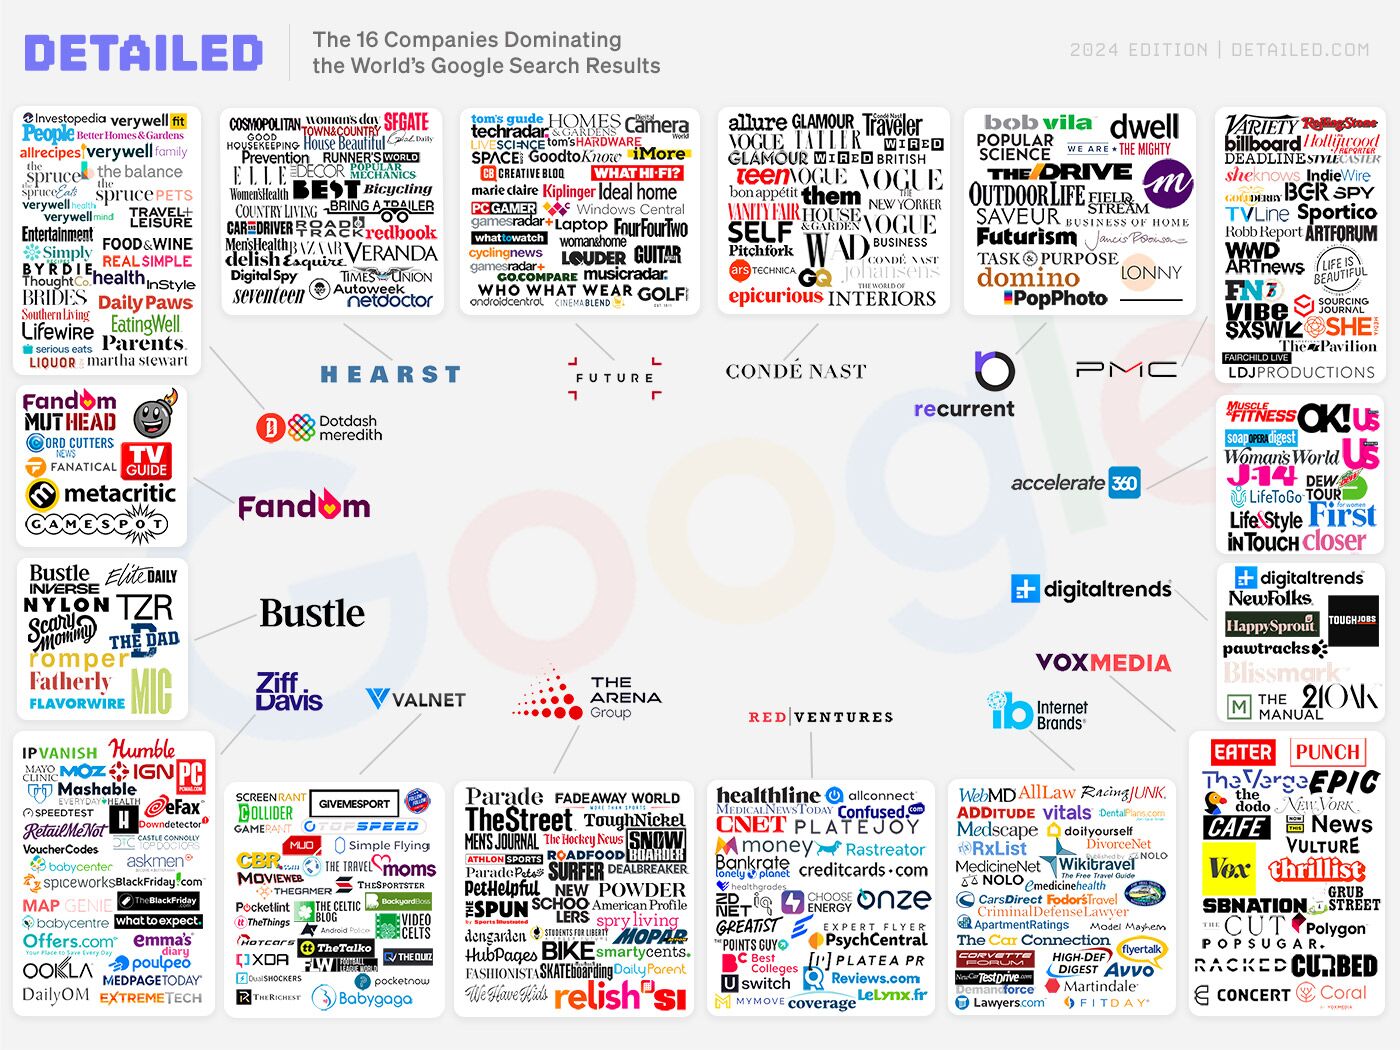 The 16 companies getting 3.5 cardinal  monthly clicks from Google crossed  588 brands